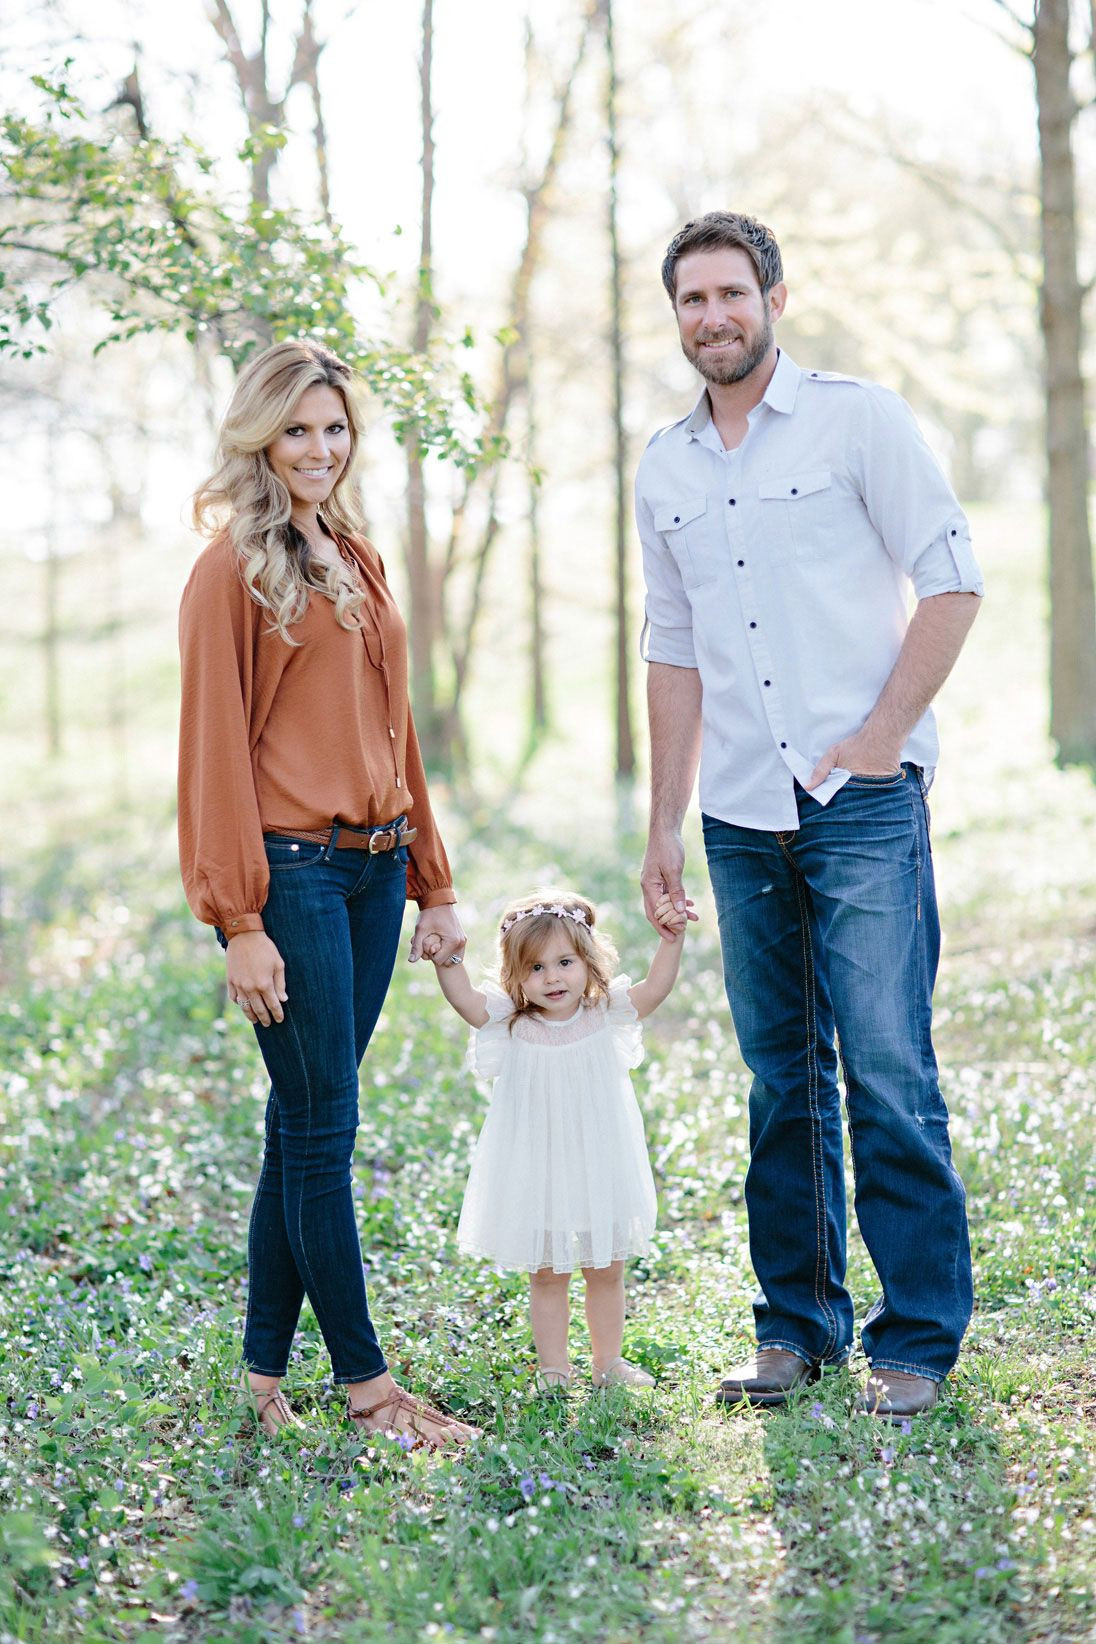 Family Fall Pictures Clothing Ideas
 Live the setting & clothing especially the sweet little